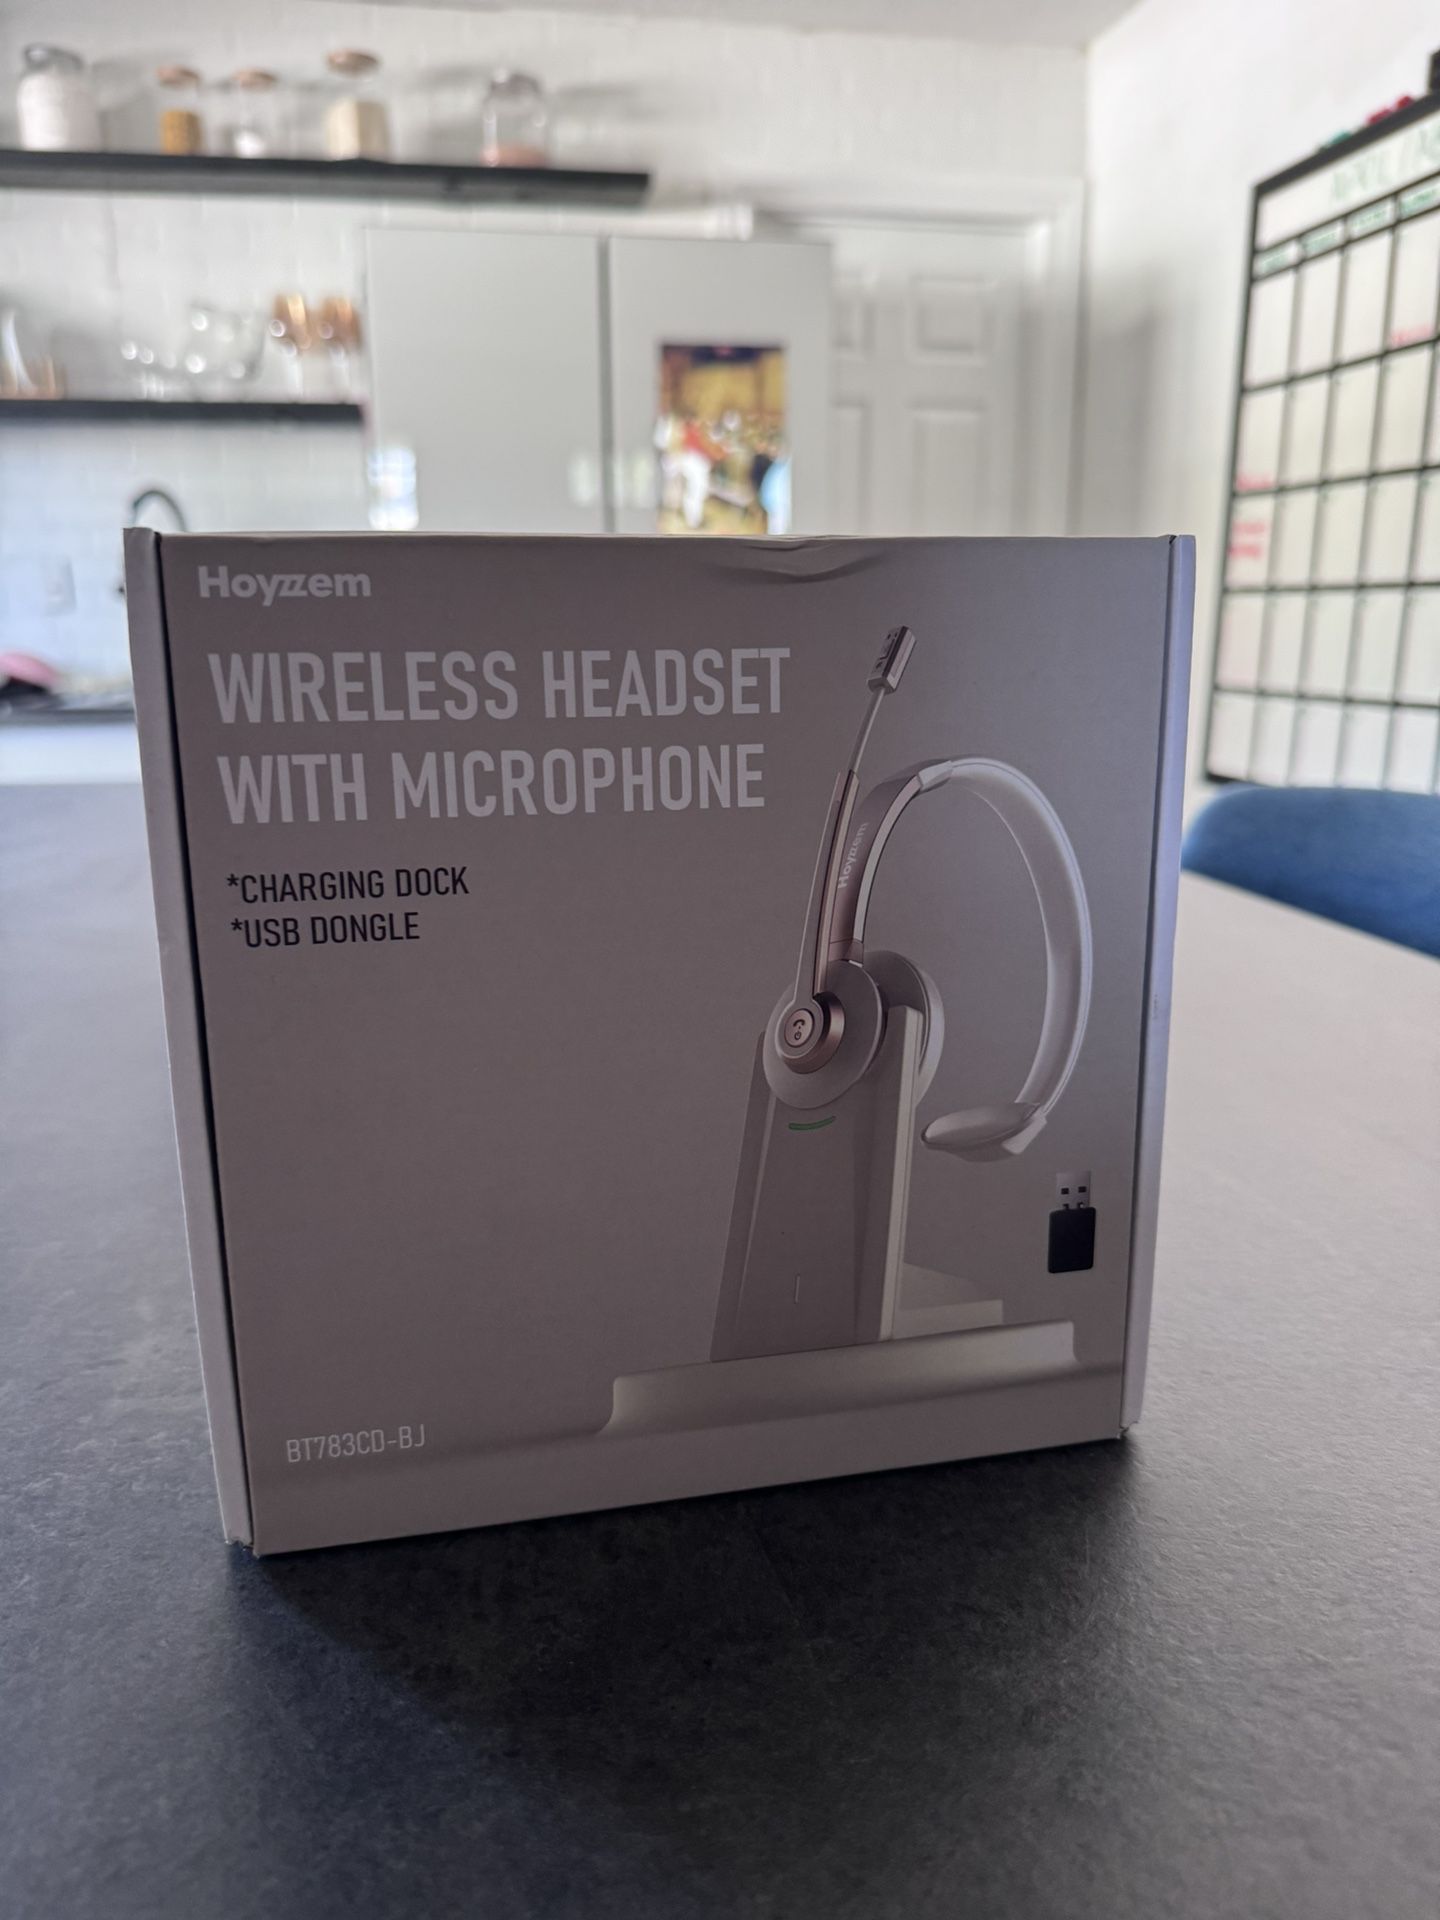 WIRELESS HEADSET FOR COMPUTER AND PHONE